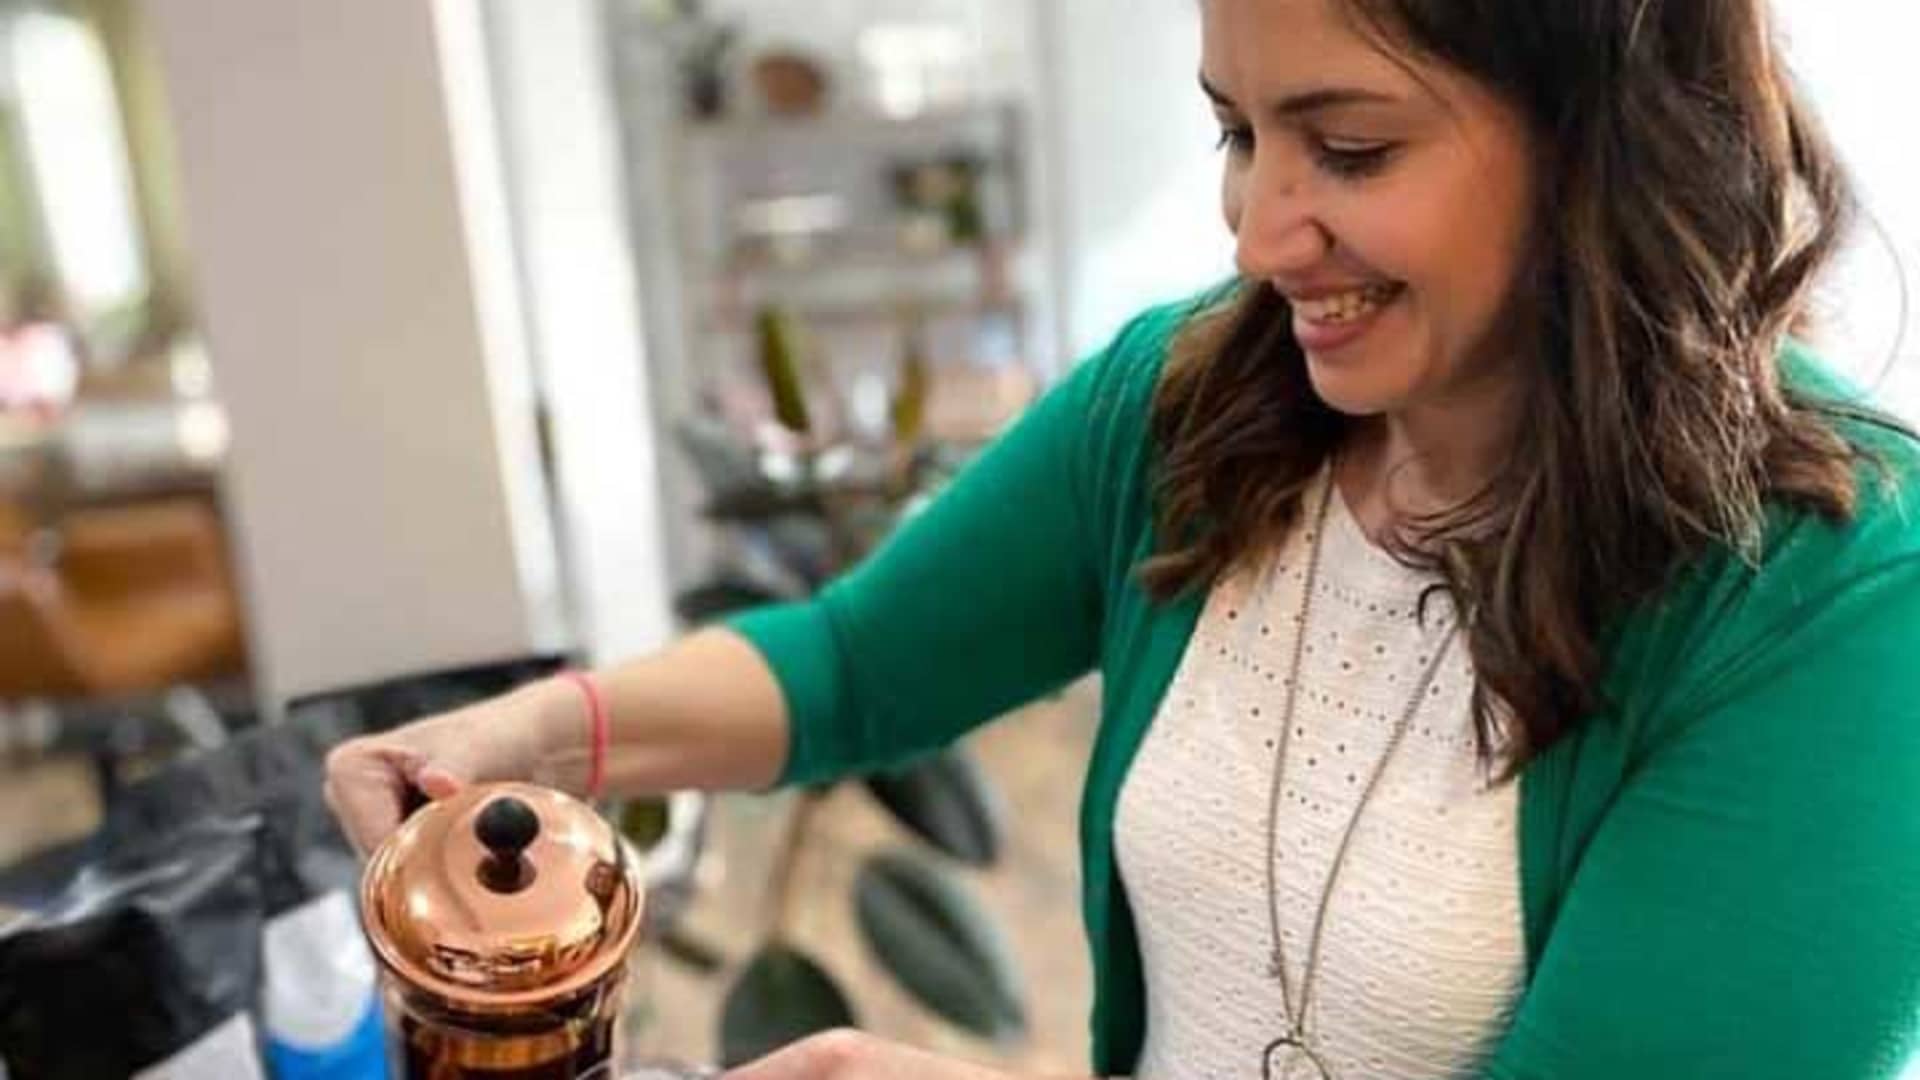 Navy veteran Melissa Green, a mother of four and the wife of Landis Green, a retired Gunners Mate in the U.S. Navy, launched her own coffee company out of her home this year.